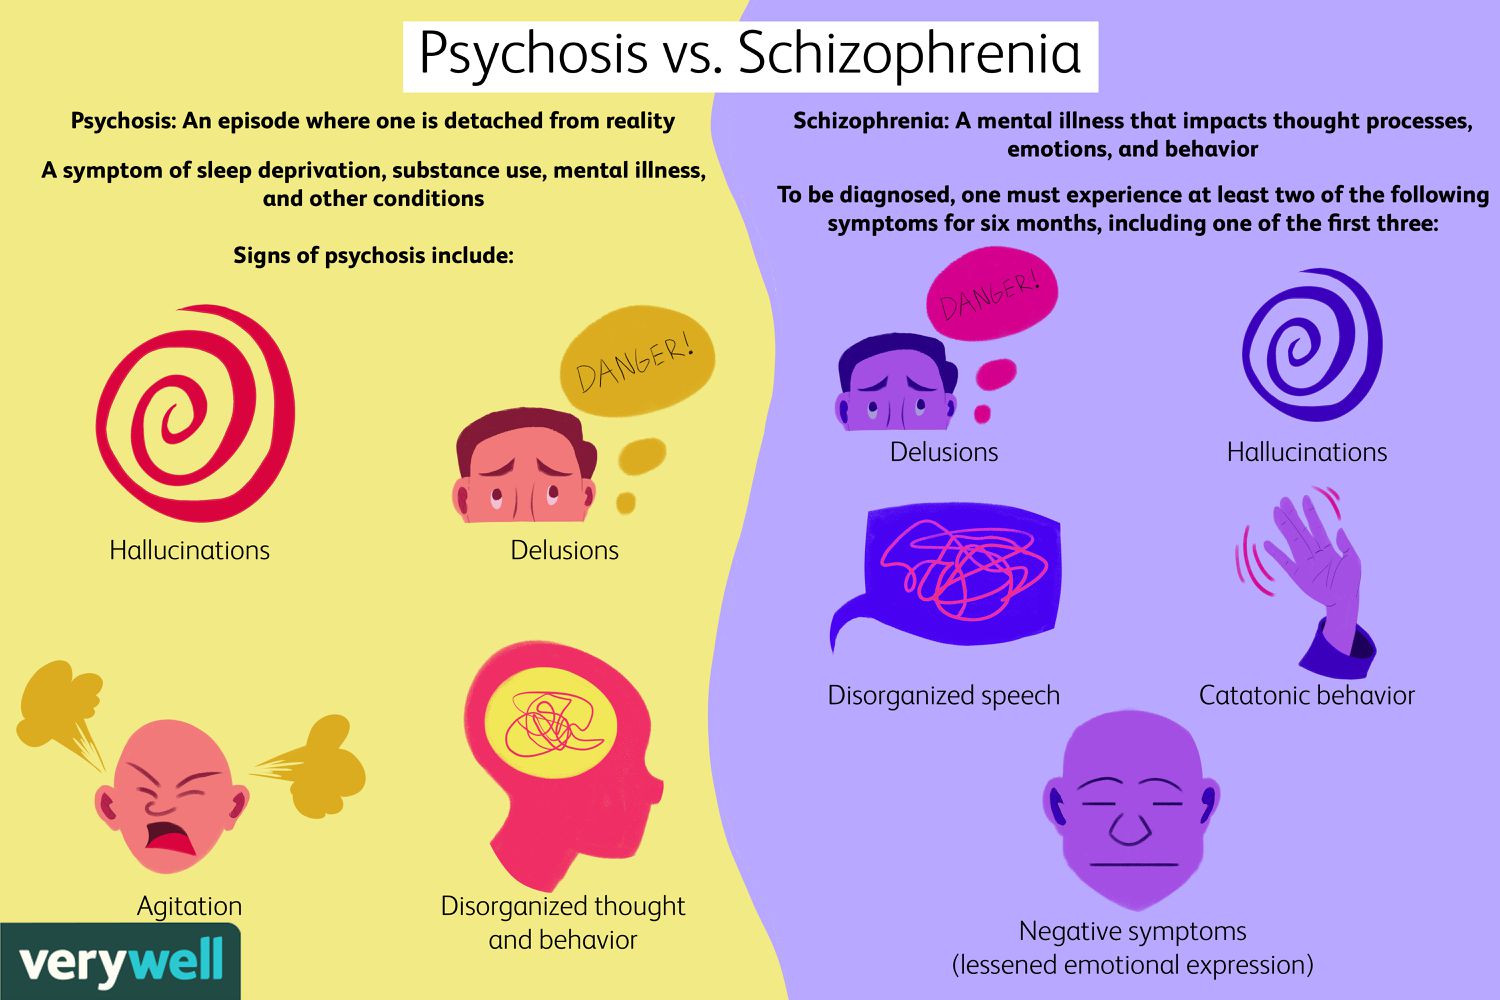 What Is the Difference Between Psychosis and Schizophrenia?